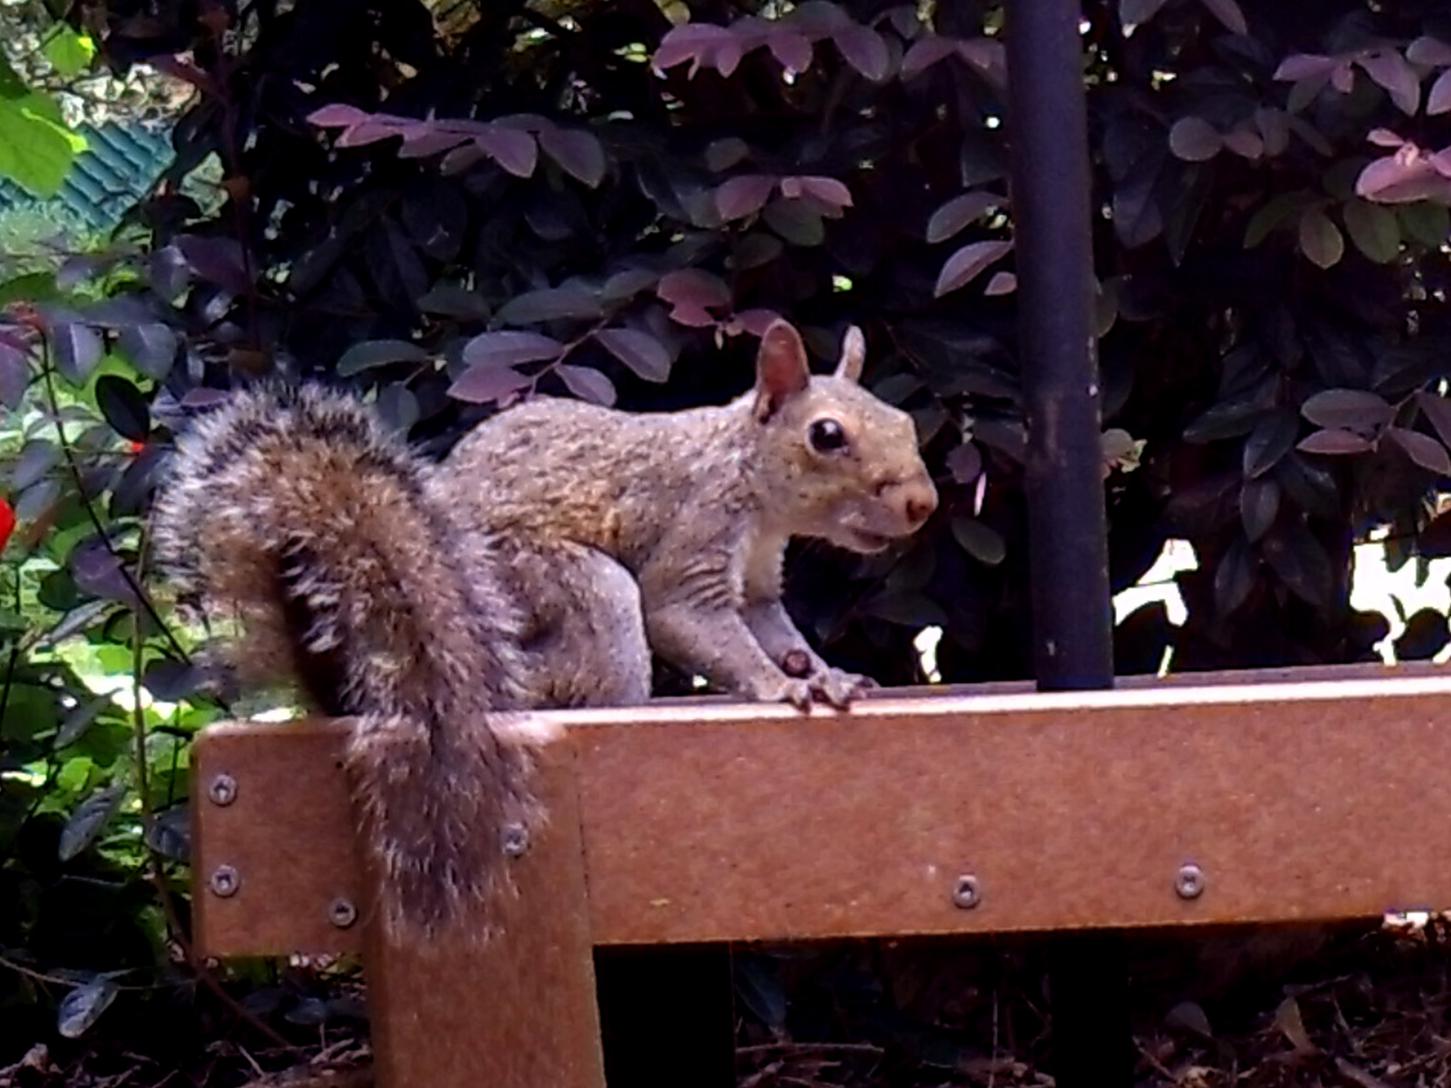 Alert gray squirrel pauses on a platform with shrubbery in the background.